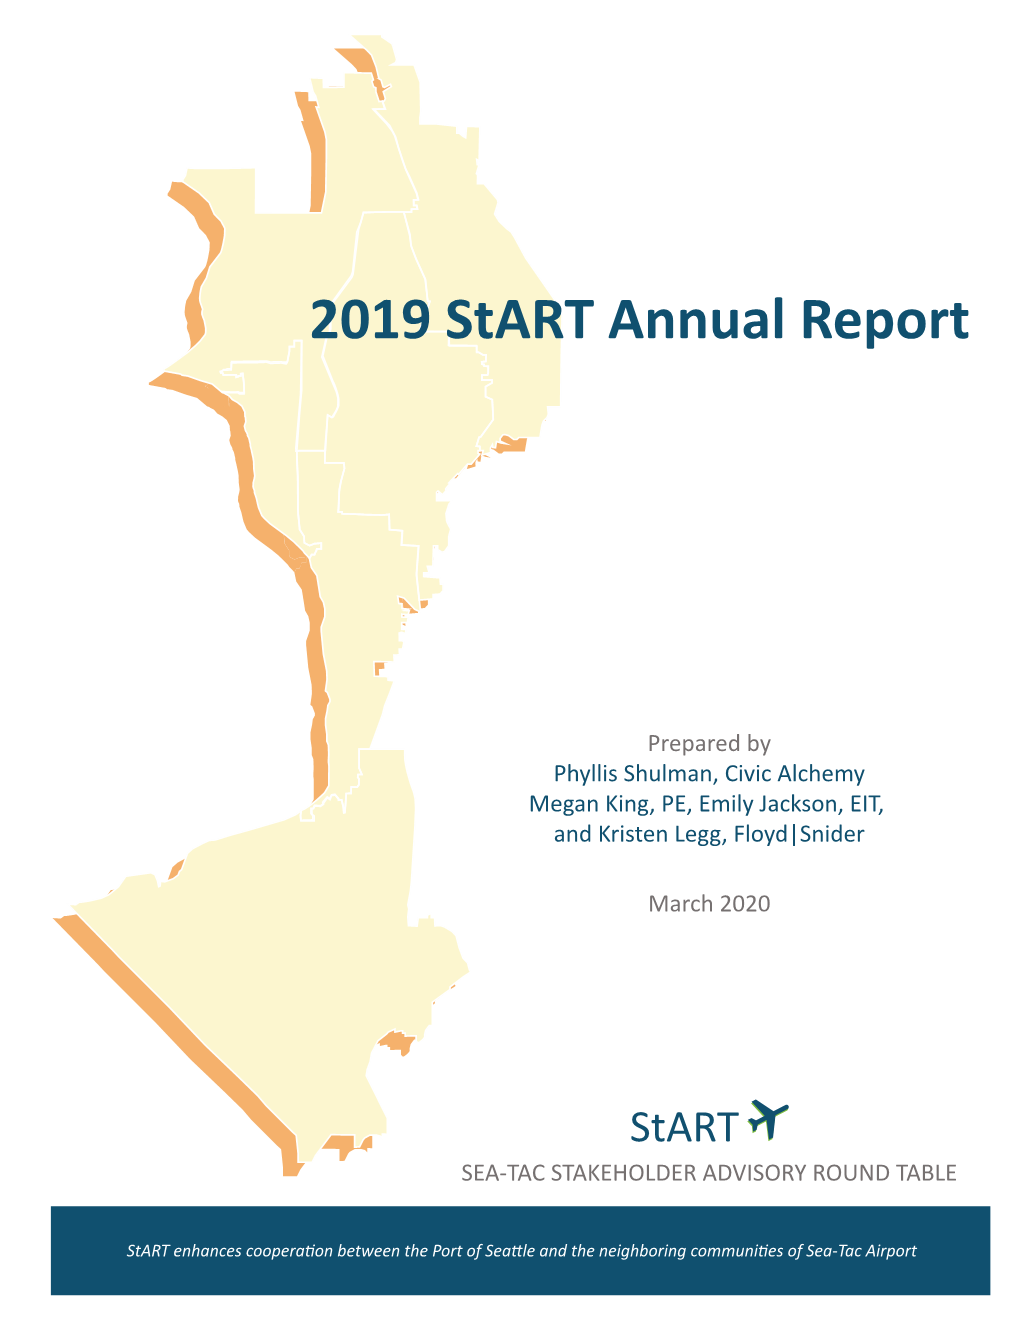 Sea-Tac Stakeholder Advisory Round Table (Start) 2019 Annual Report